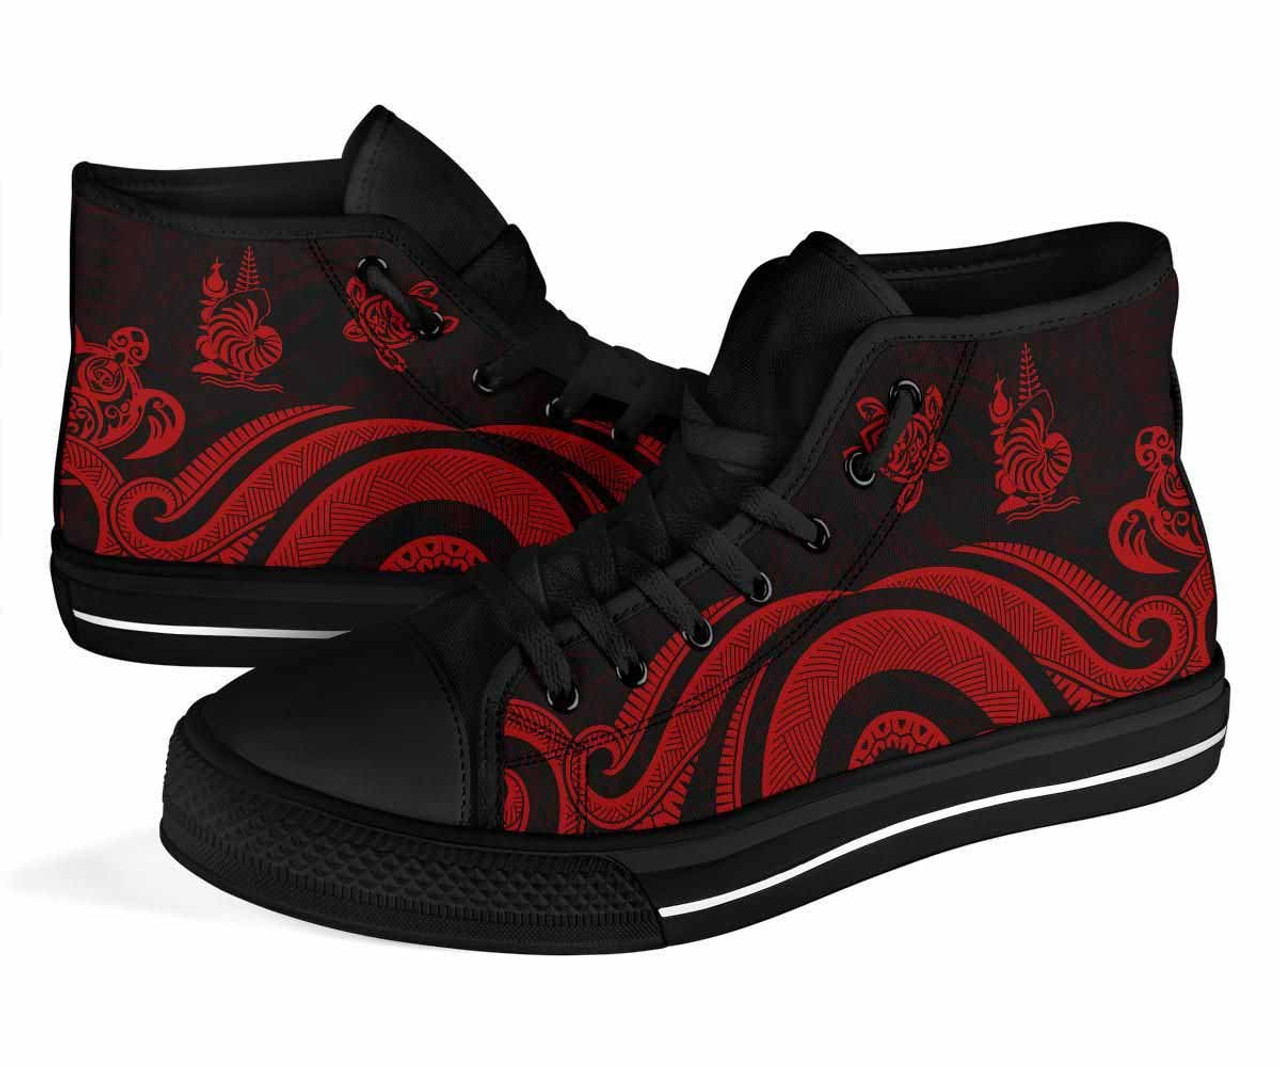 New Caledonia High Top Canvas Shoes - Red Tentacle Turtle 3